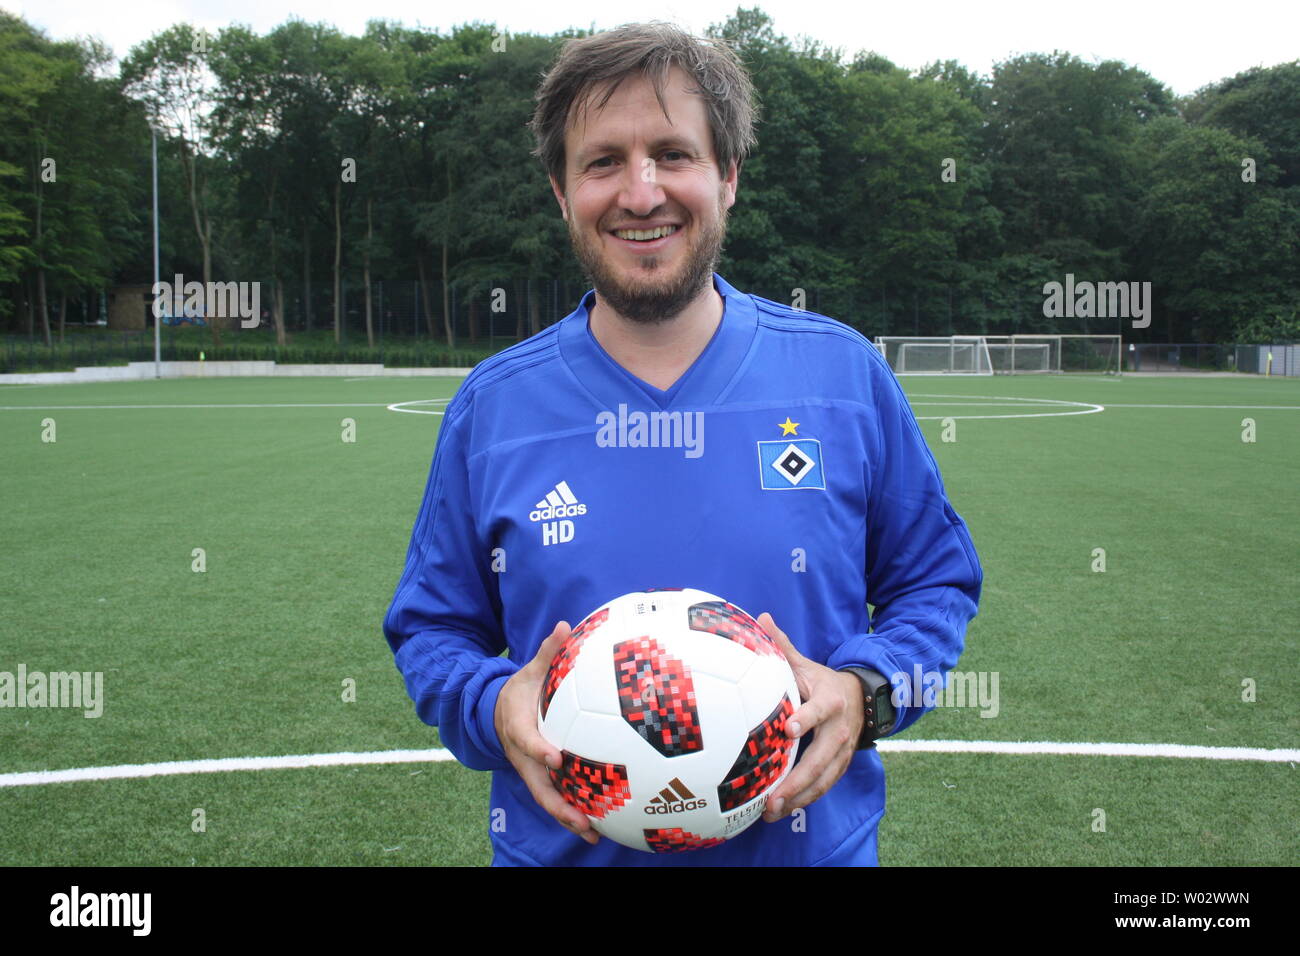 Hamburg, Germany. 19th June, 2019. Hannes Drews, coach of the U21 of  Hamburger SV, is on the training ground. Just over a year ago, Hannes Drews  and FC Erzgebirge Aue celebrated their